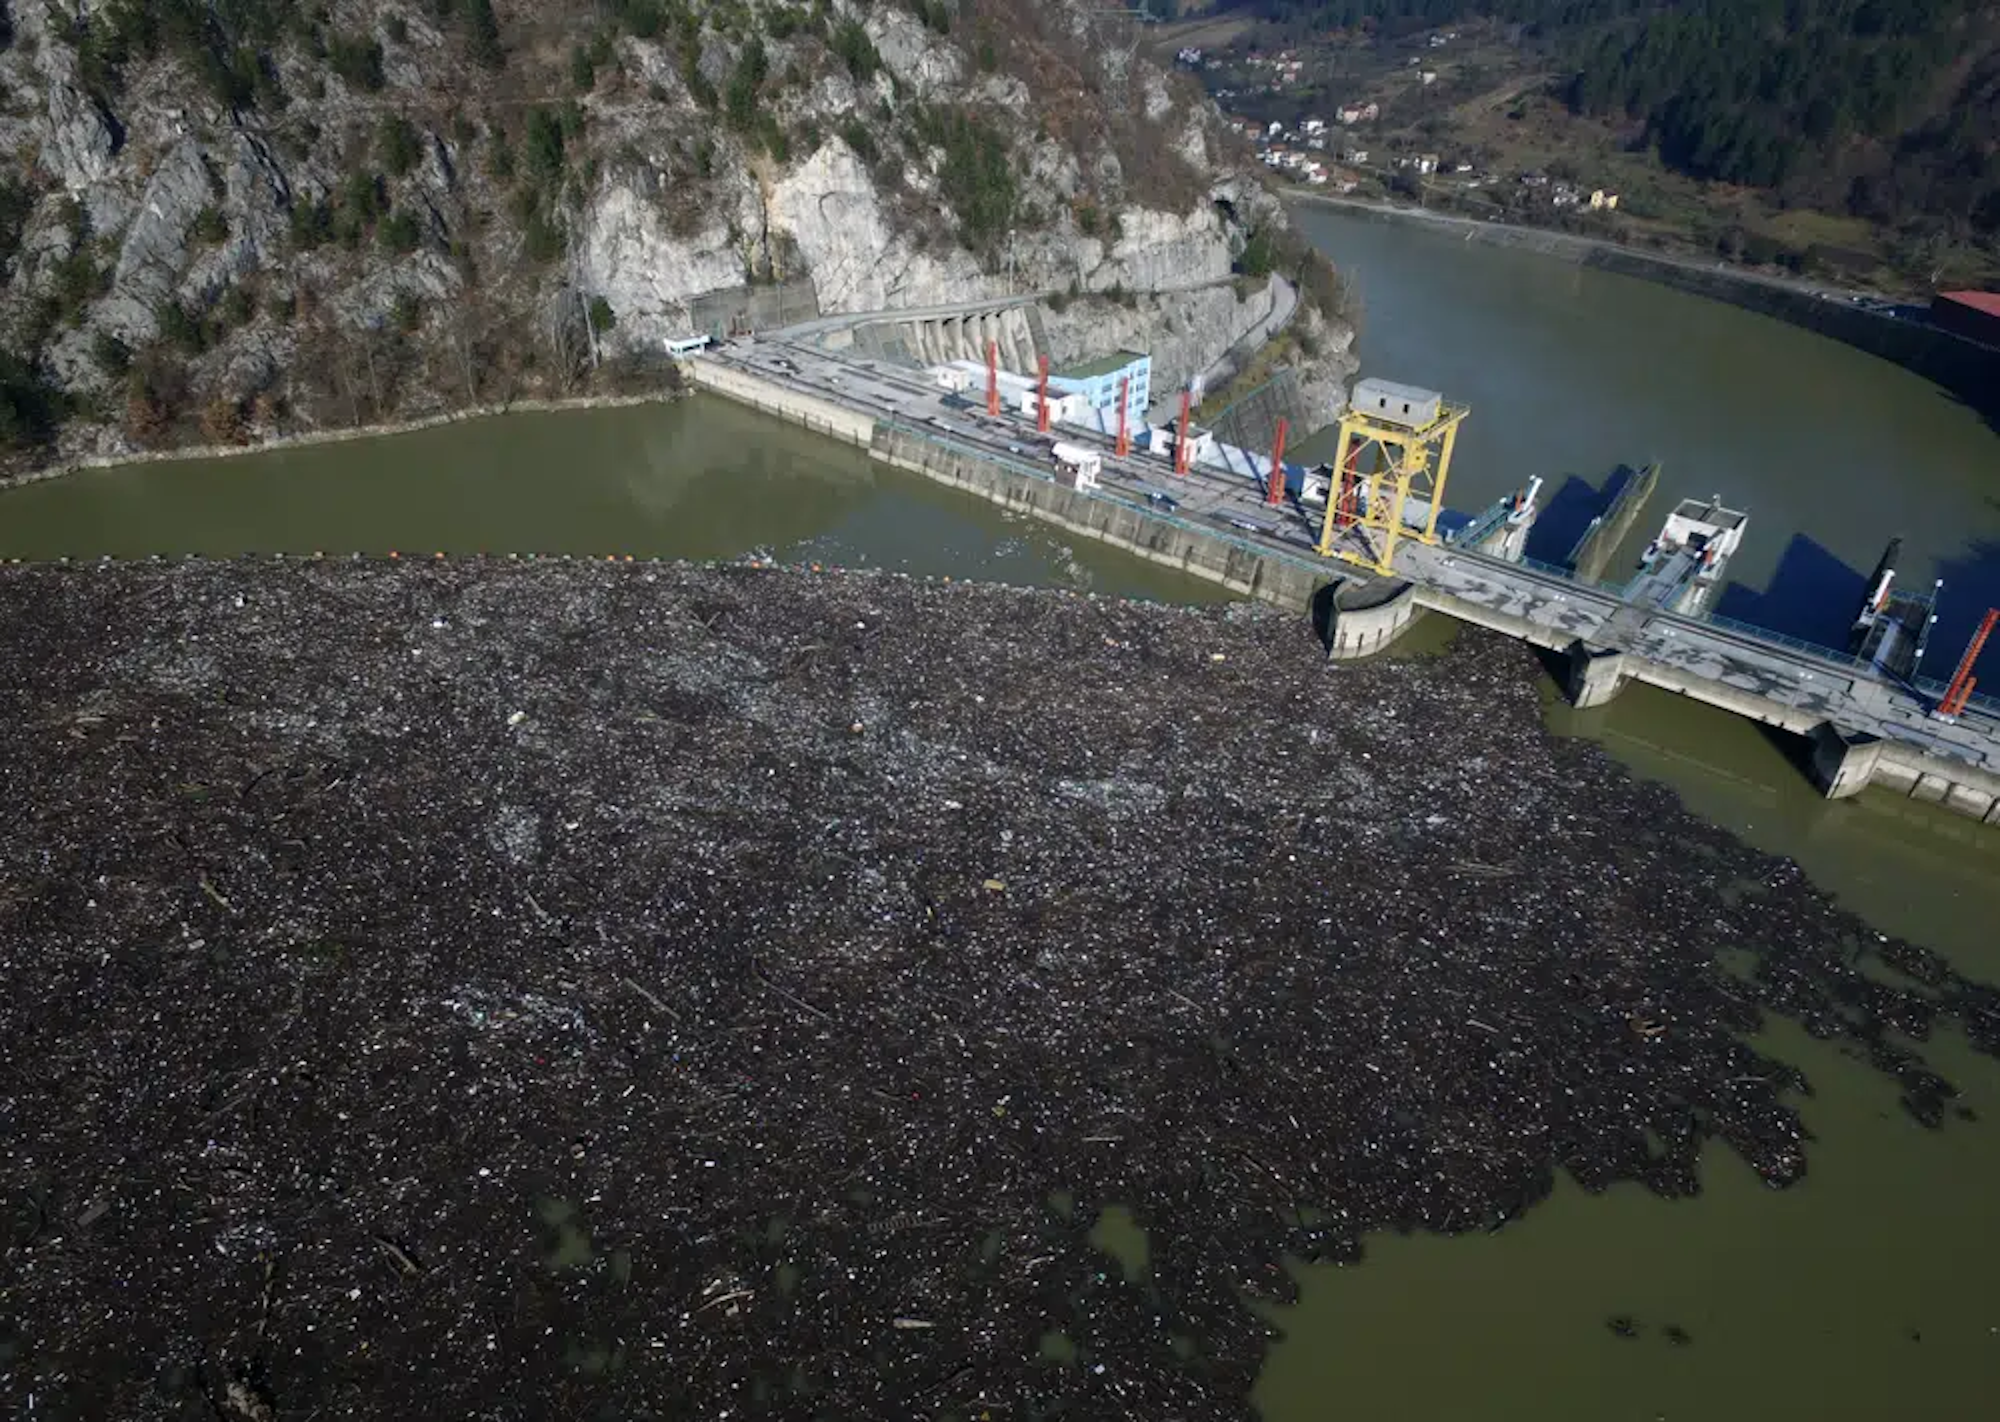 Aerial photo showing plastic bottles, wooden planks, rusty barrels and other garbage clogging the Drina River near the eastern Bosnian town of Visegrad, Bosnia, on 5 January 2021. Photo: Eldar Emric / AP Photo